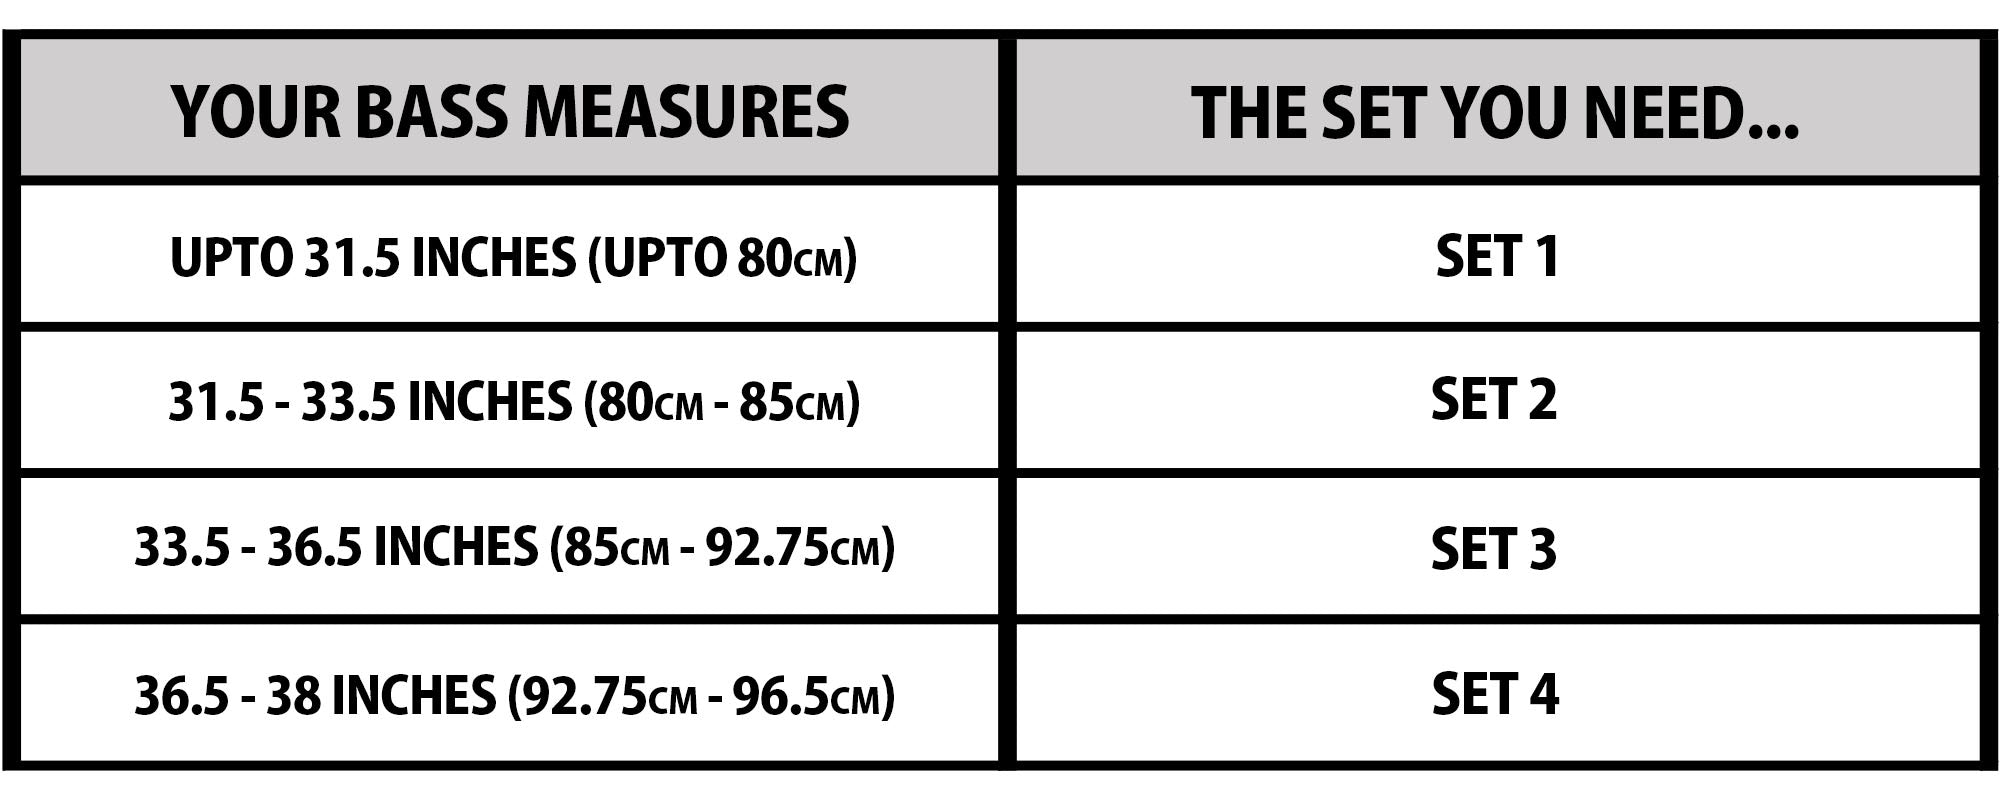 Your bass measurement and corresponding recommended string set